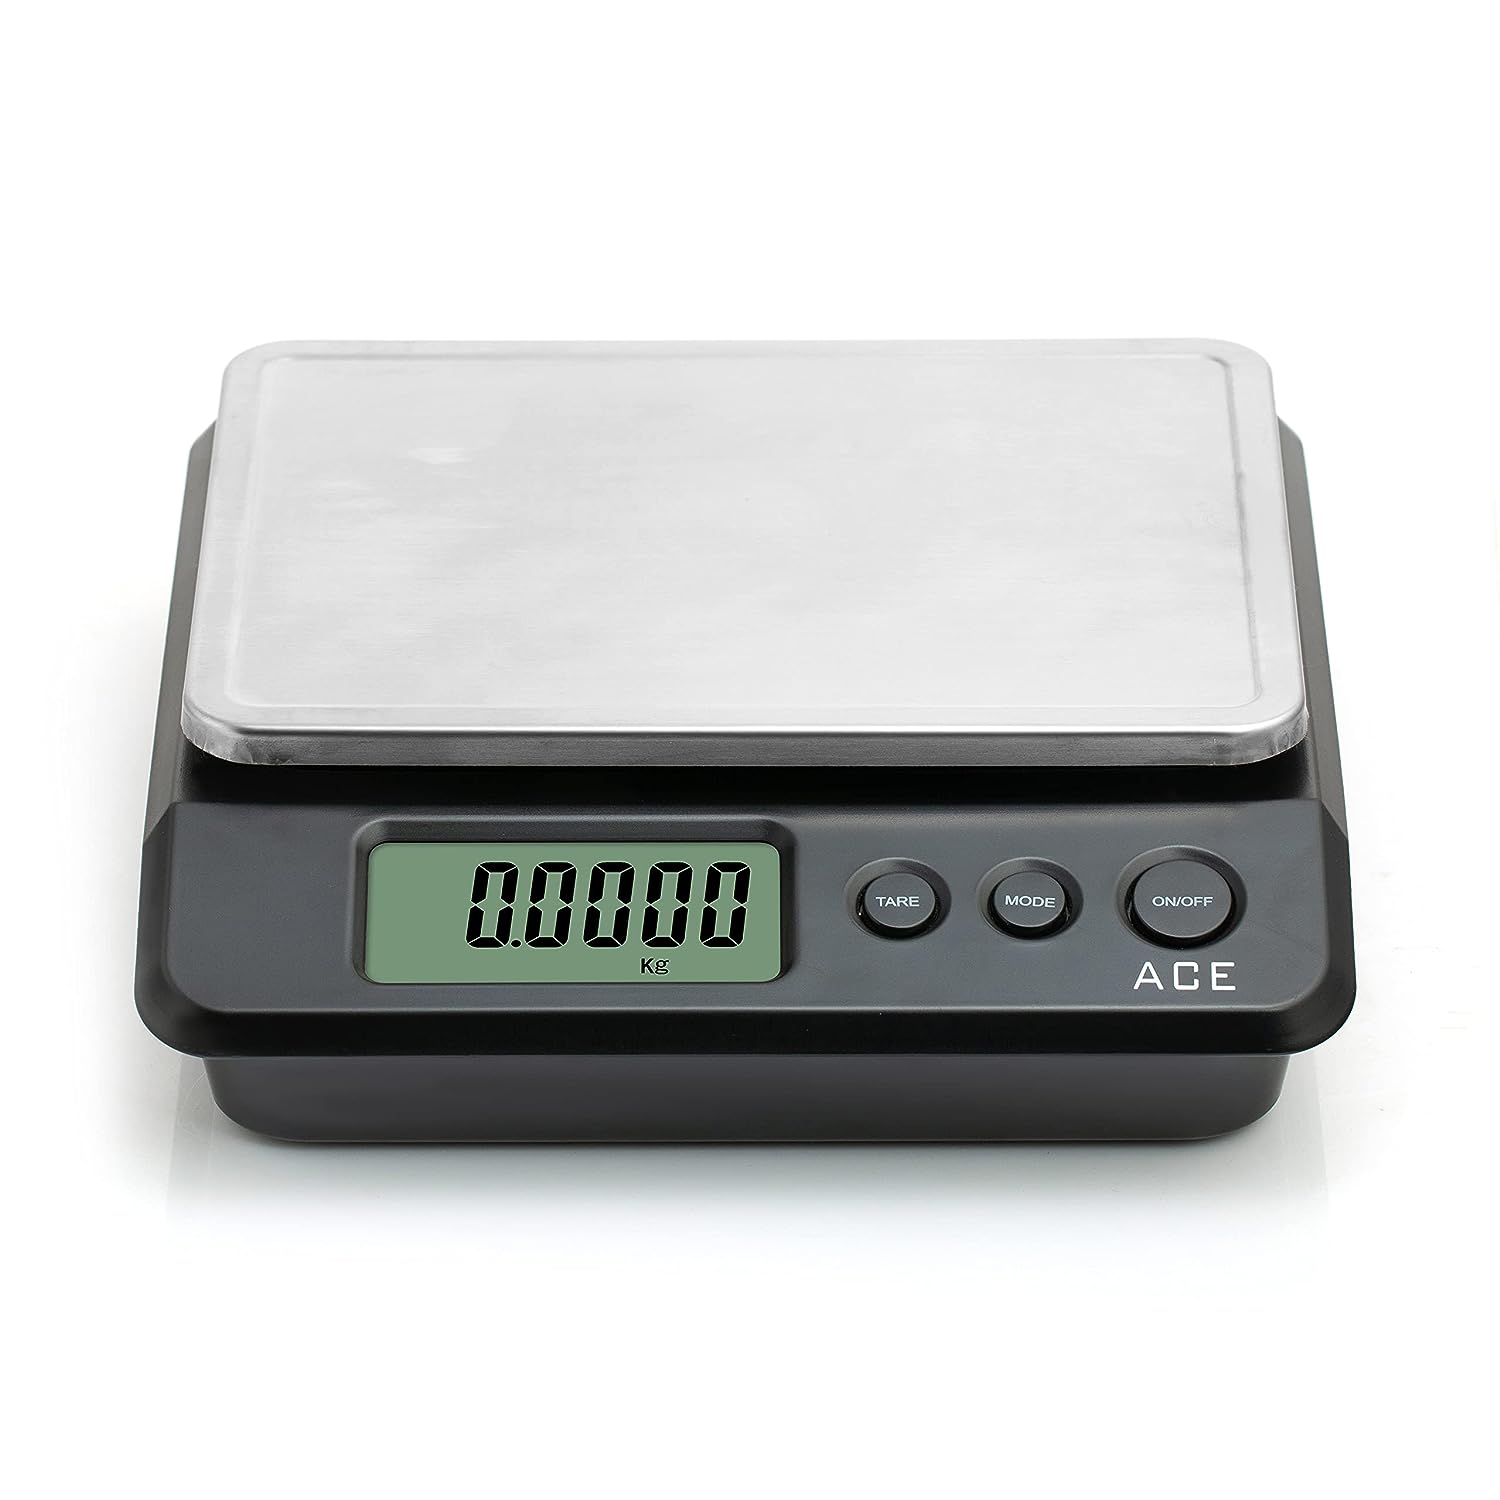 Ace Multipurpose Electronic Digital Weighing scale for Kitchen, Home, Retail store, Postal Scale Capacity 15 kg*500 mg ( With Adaptor)